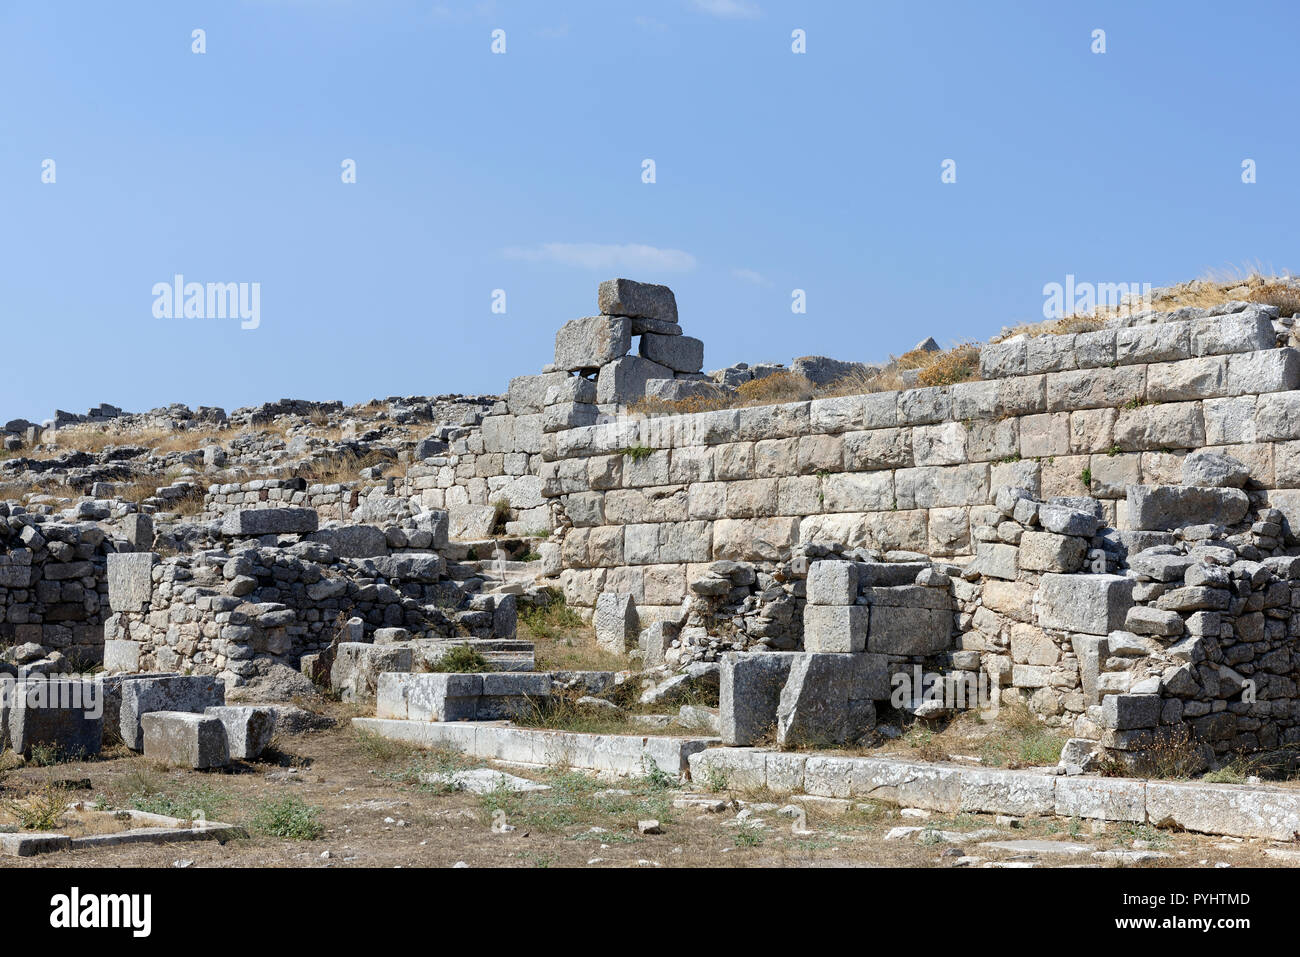 Retaining wall found in the ancient city of Thera, Santorini, Greece. Stock Photo